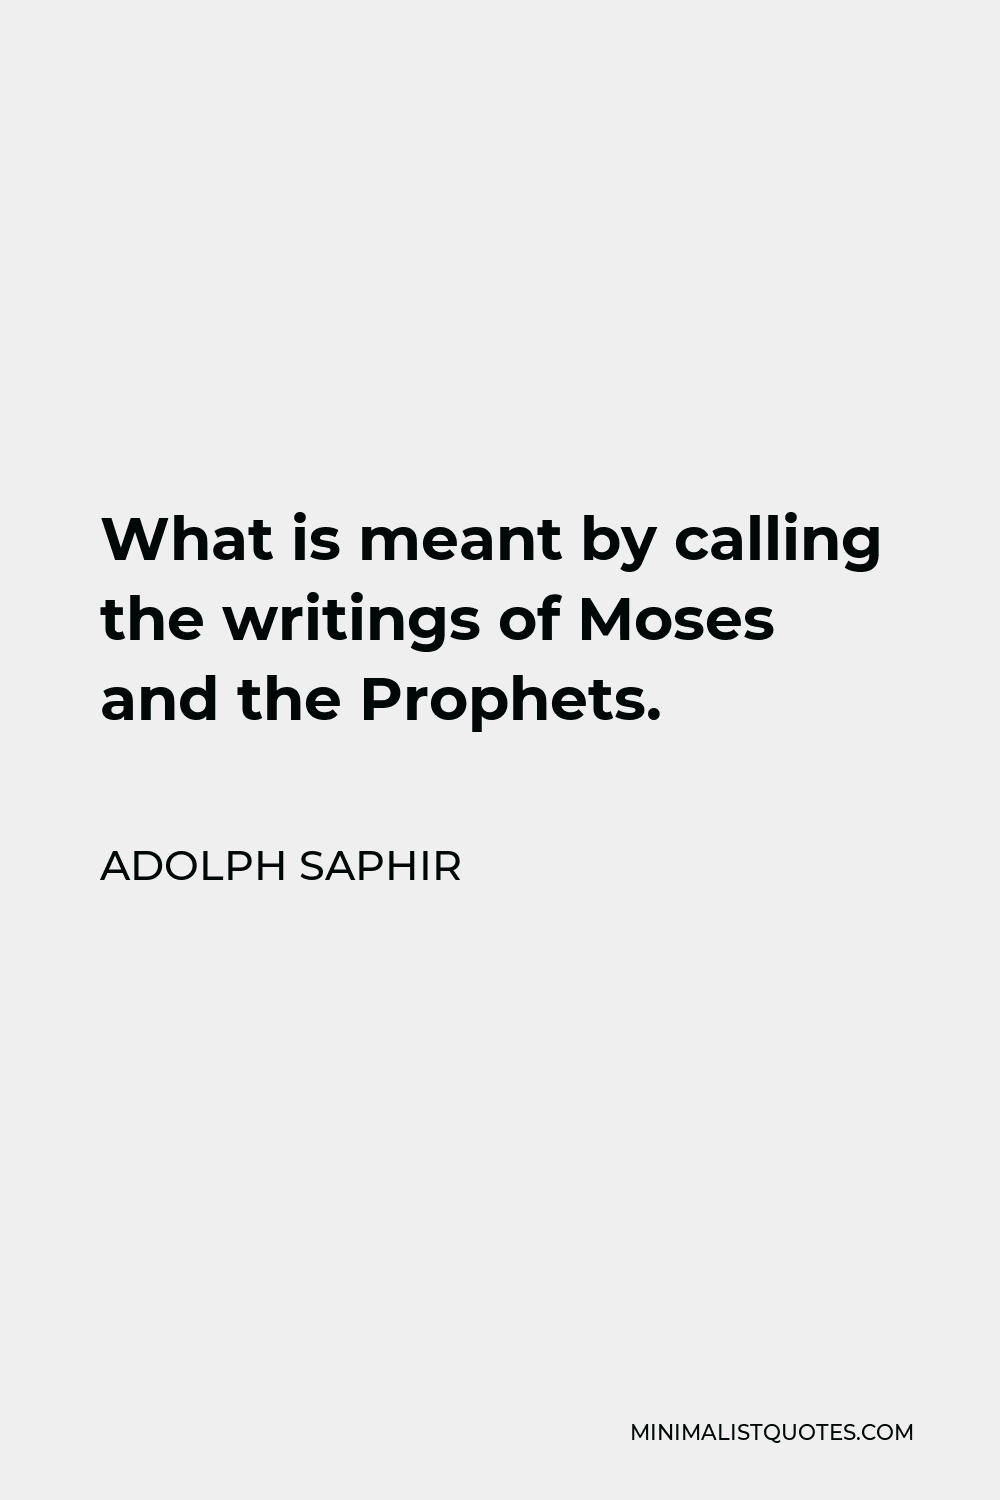 adolph-saphir-quote-what-is-meant-by-calling-the-writings-of-moses-and